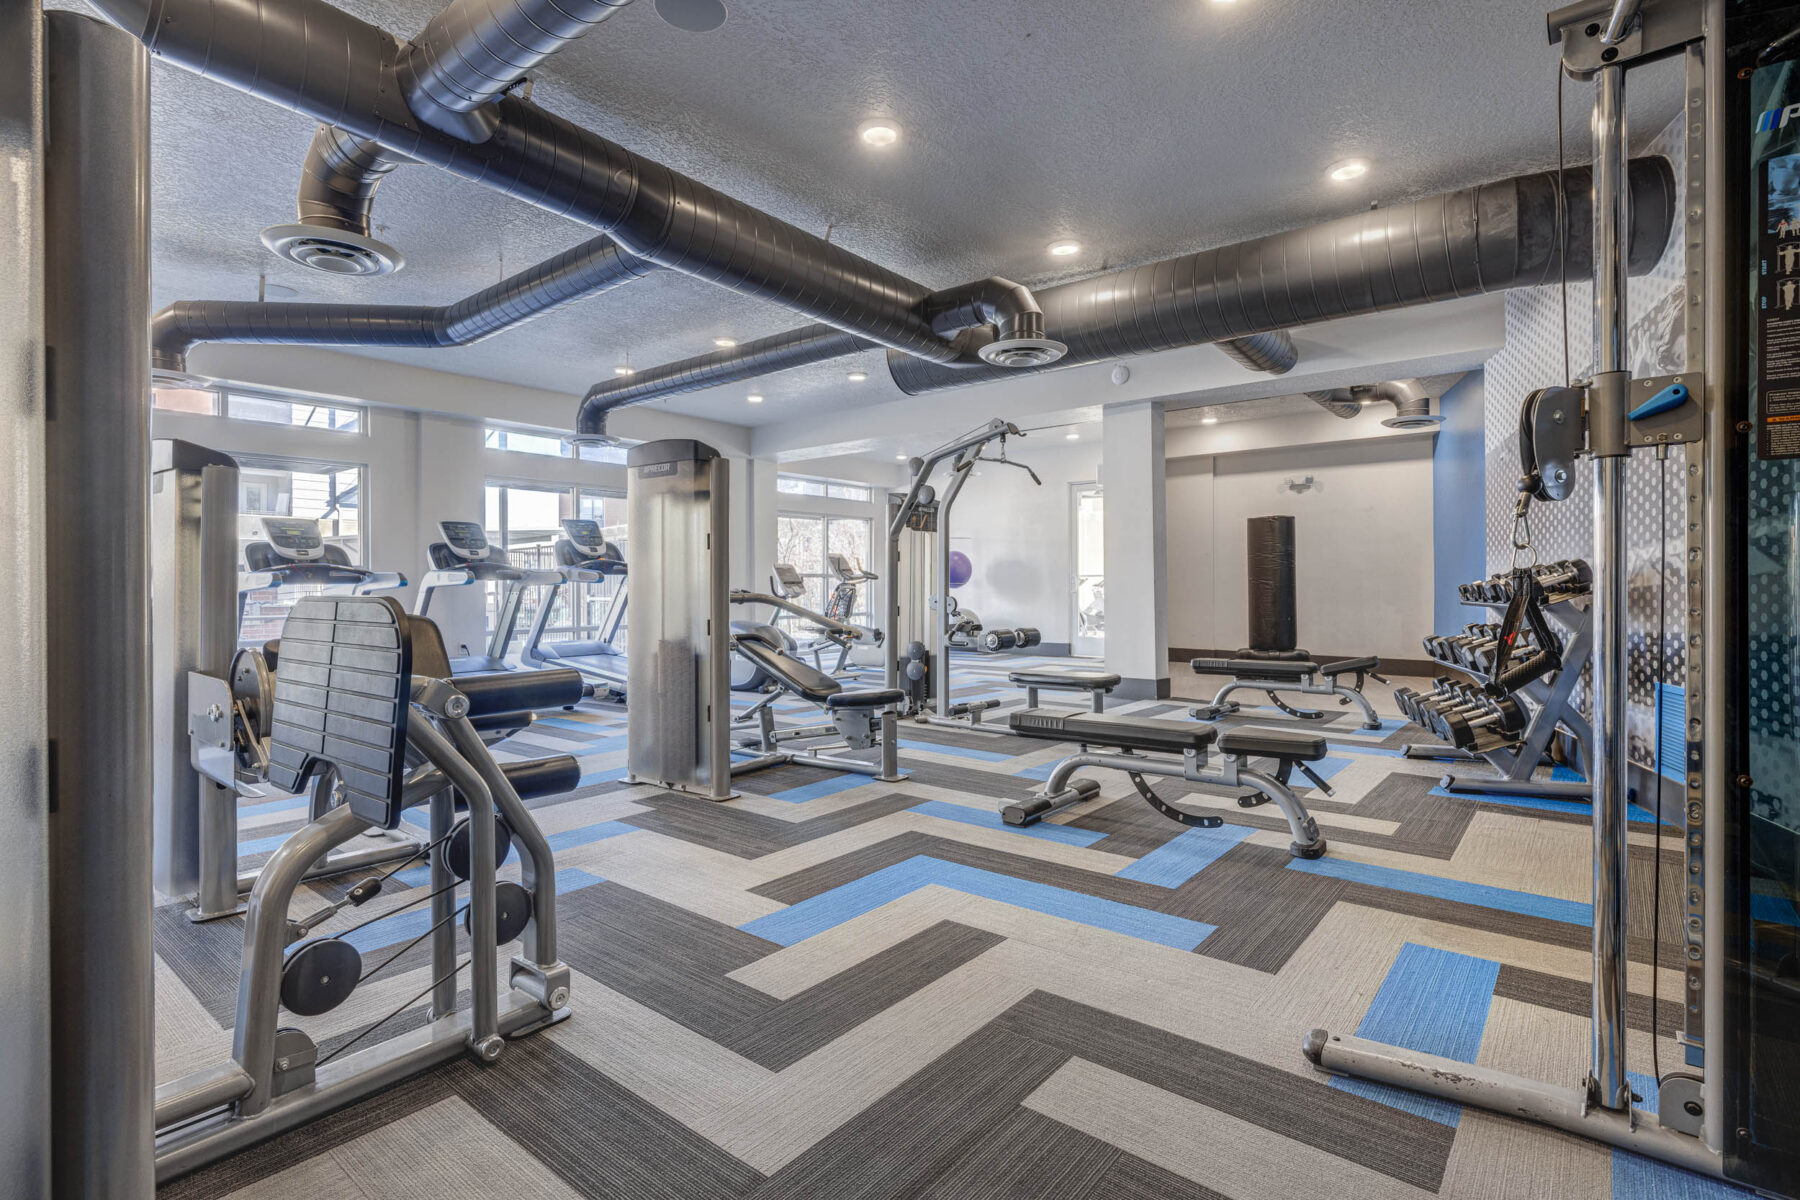 Fitness center with strength training machines and cardio equipment